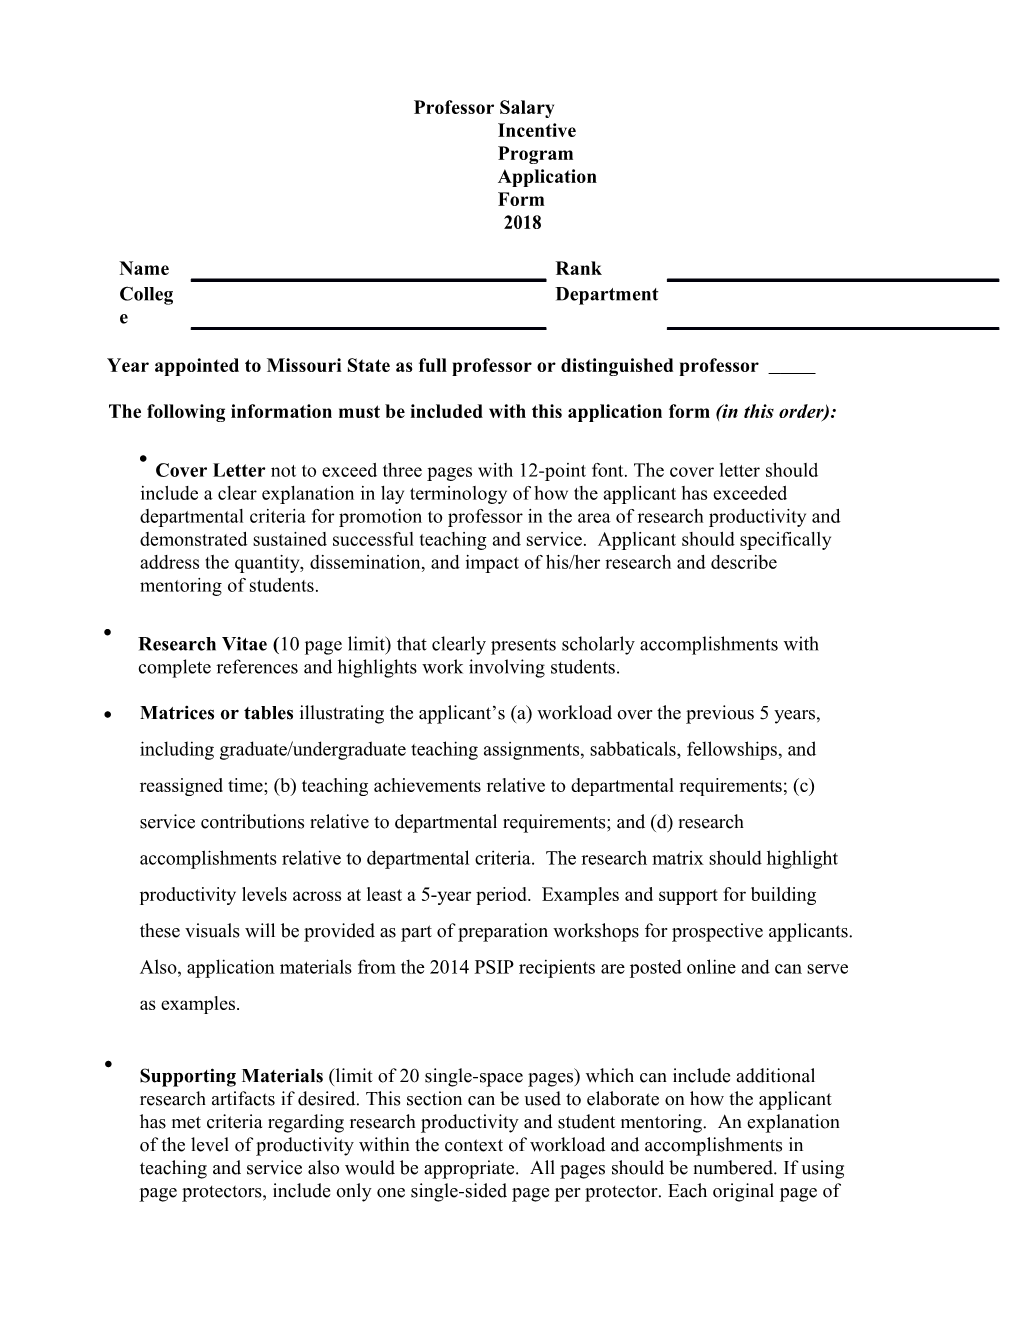 University and College Award Application Form